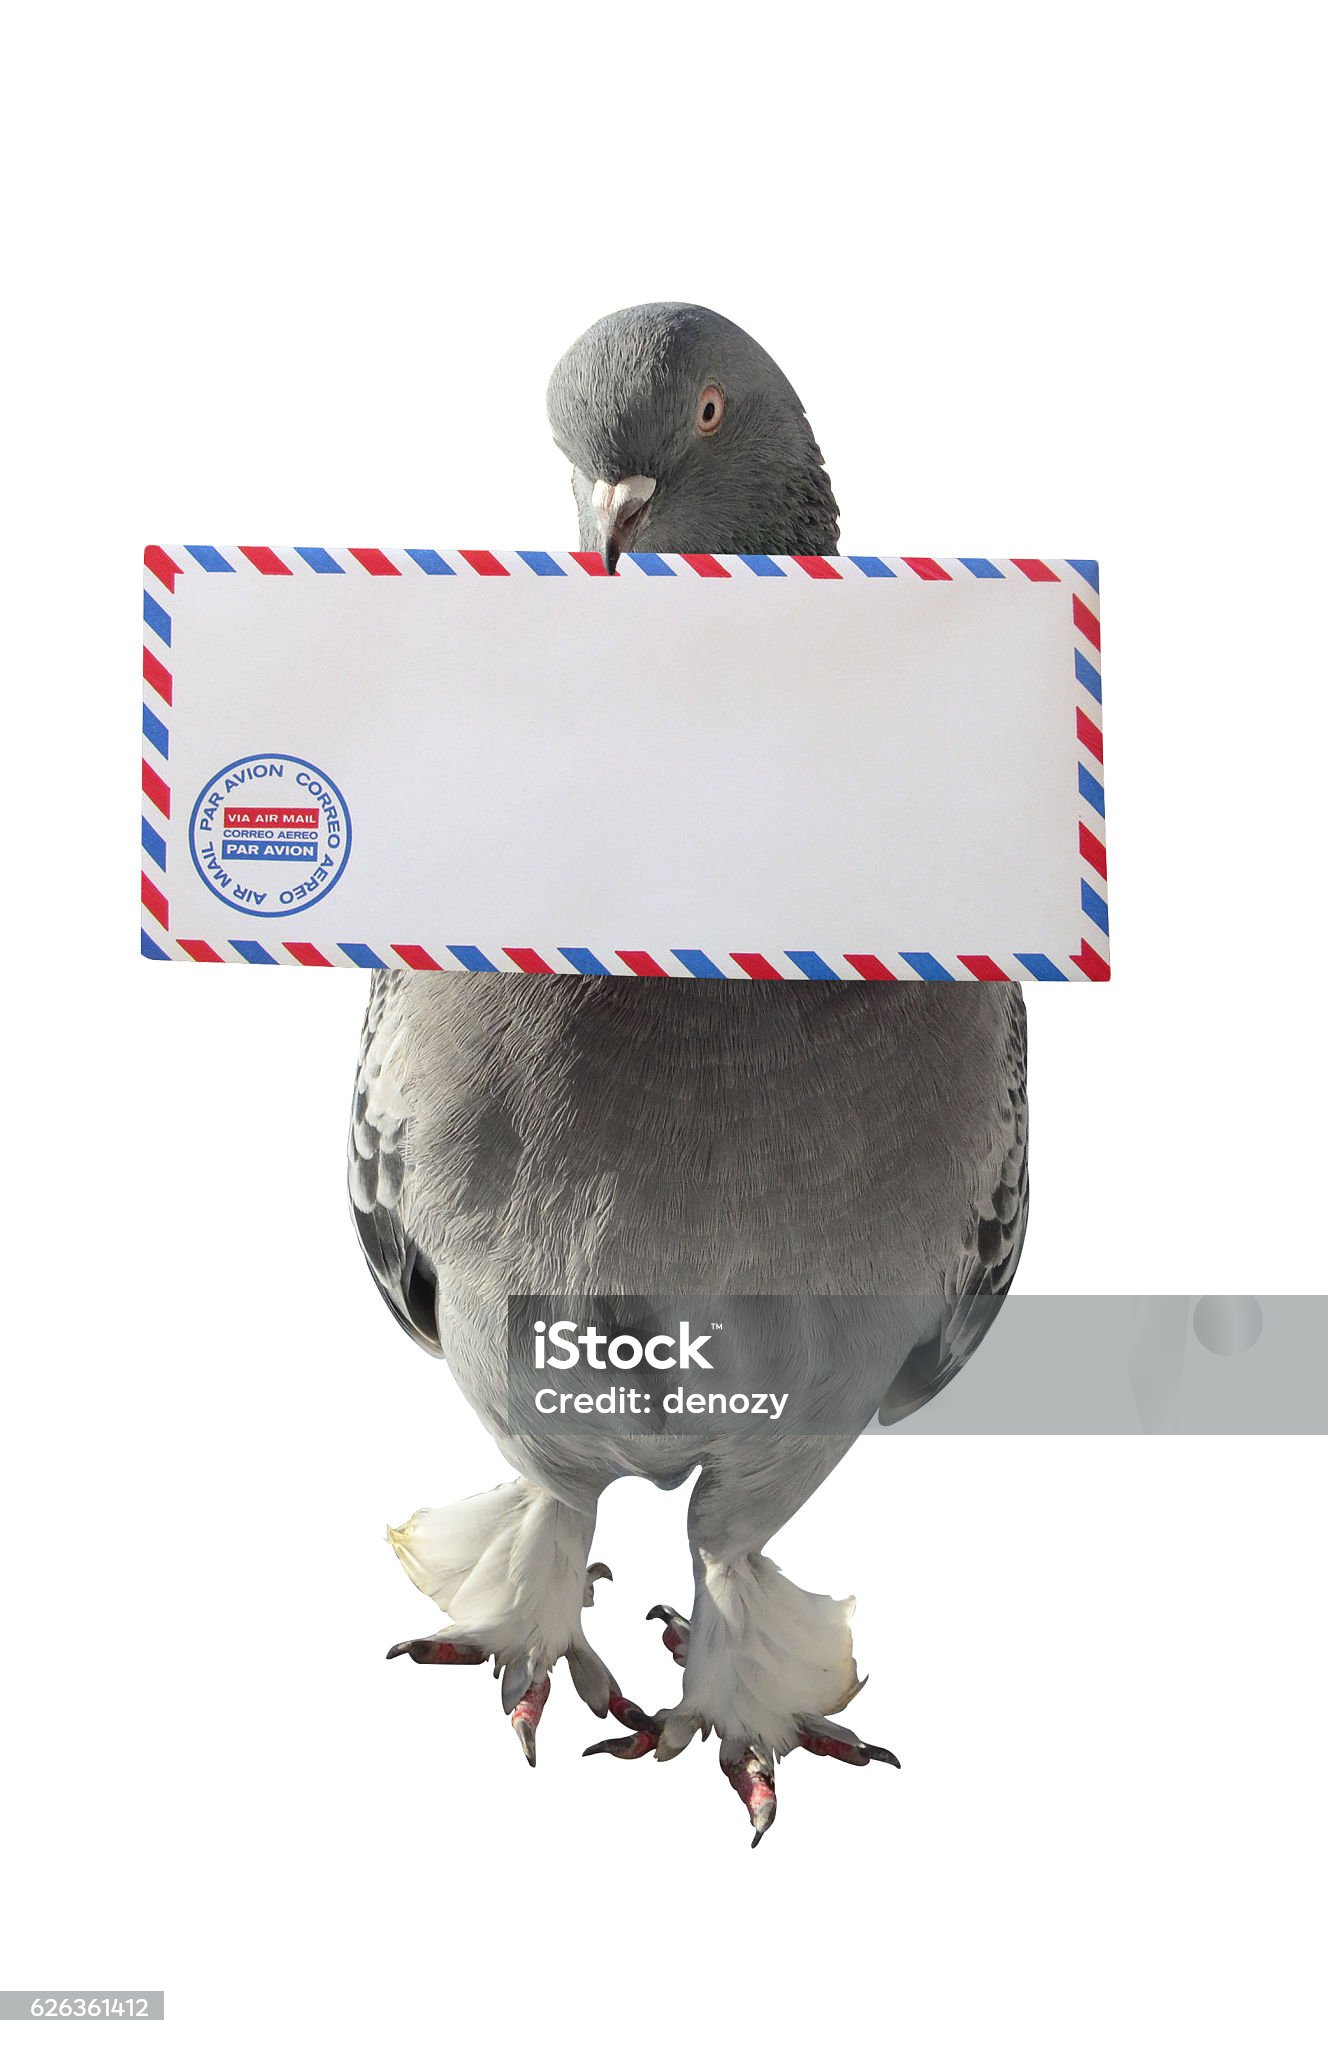 dove-carrying-air-mail-envelope-white-background.jpg